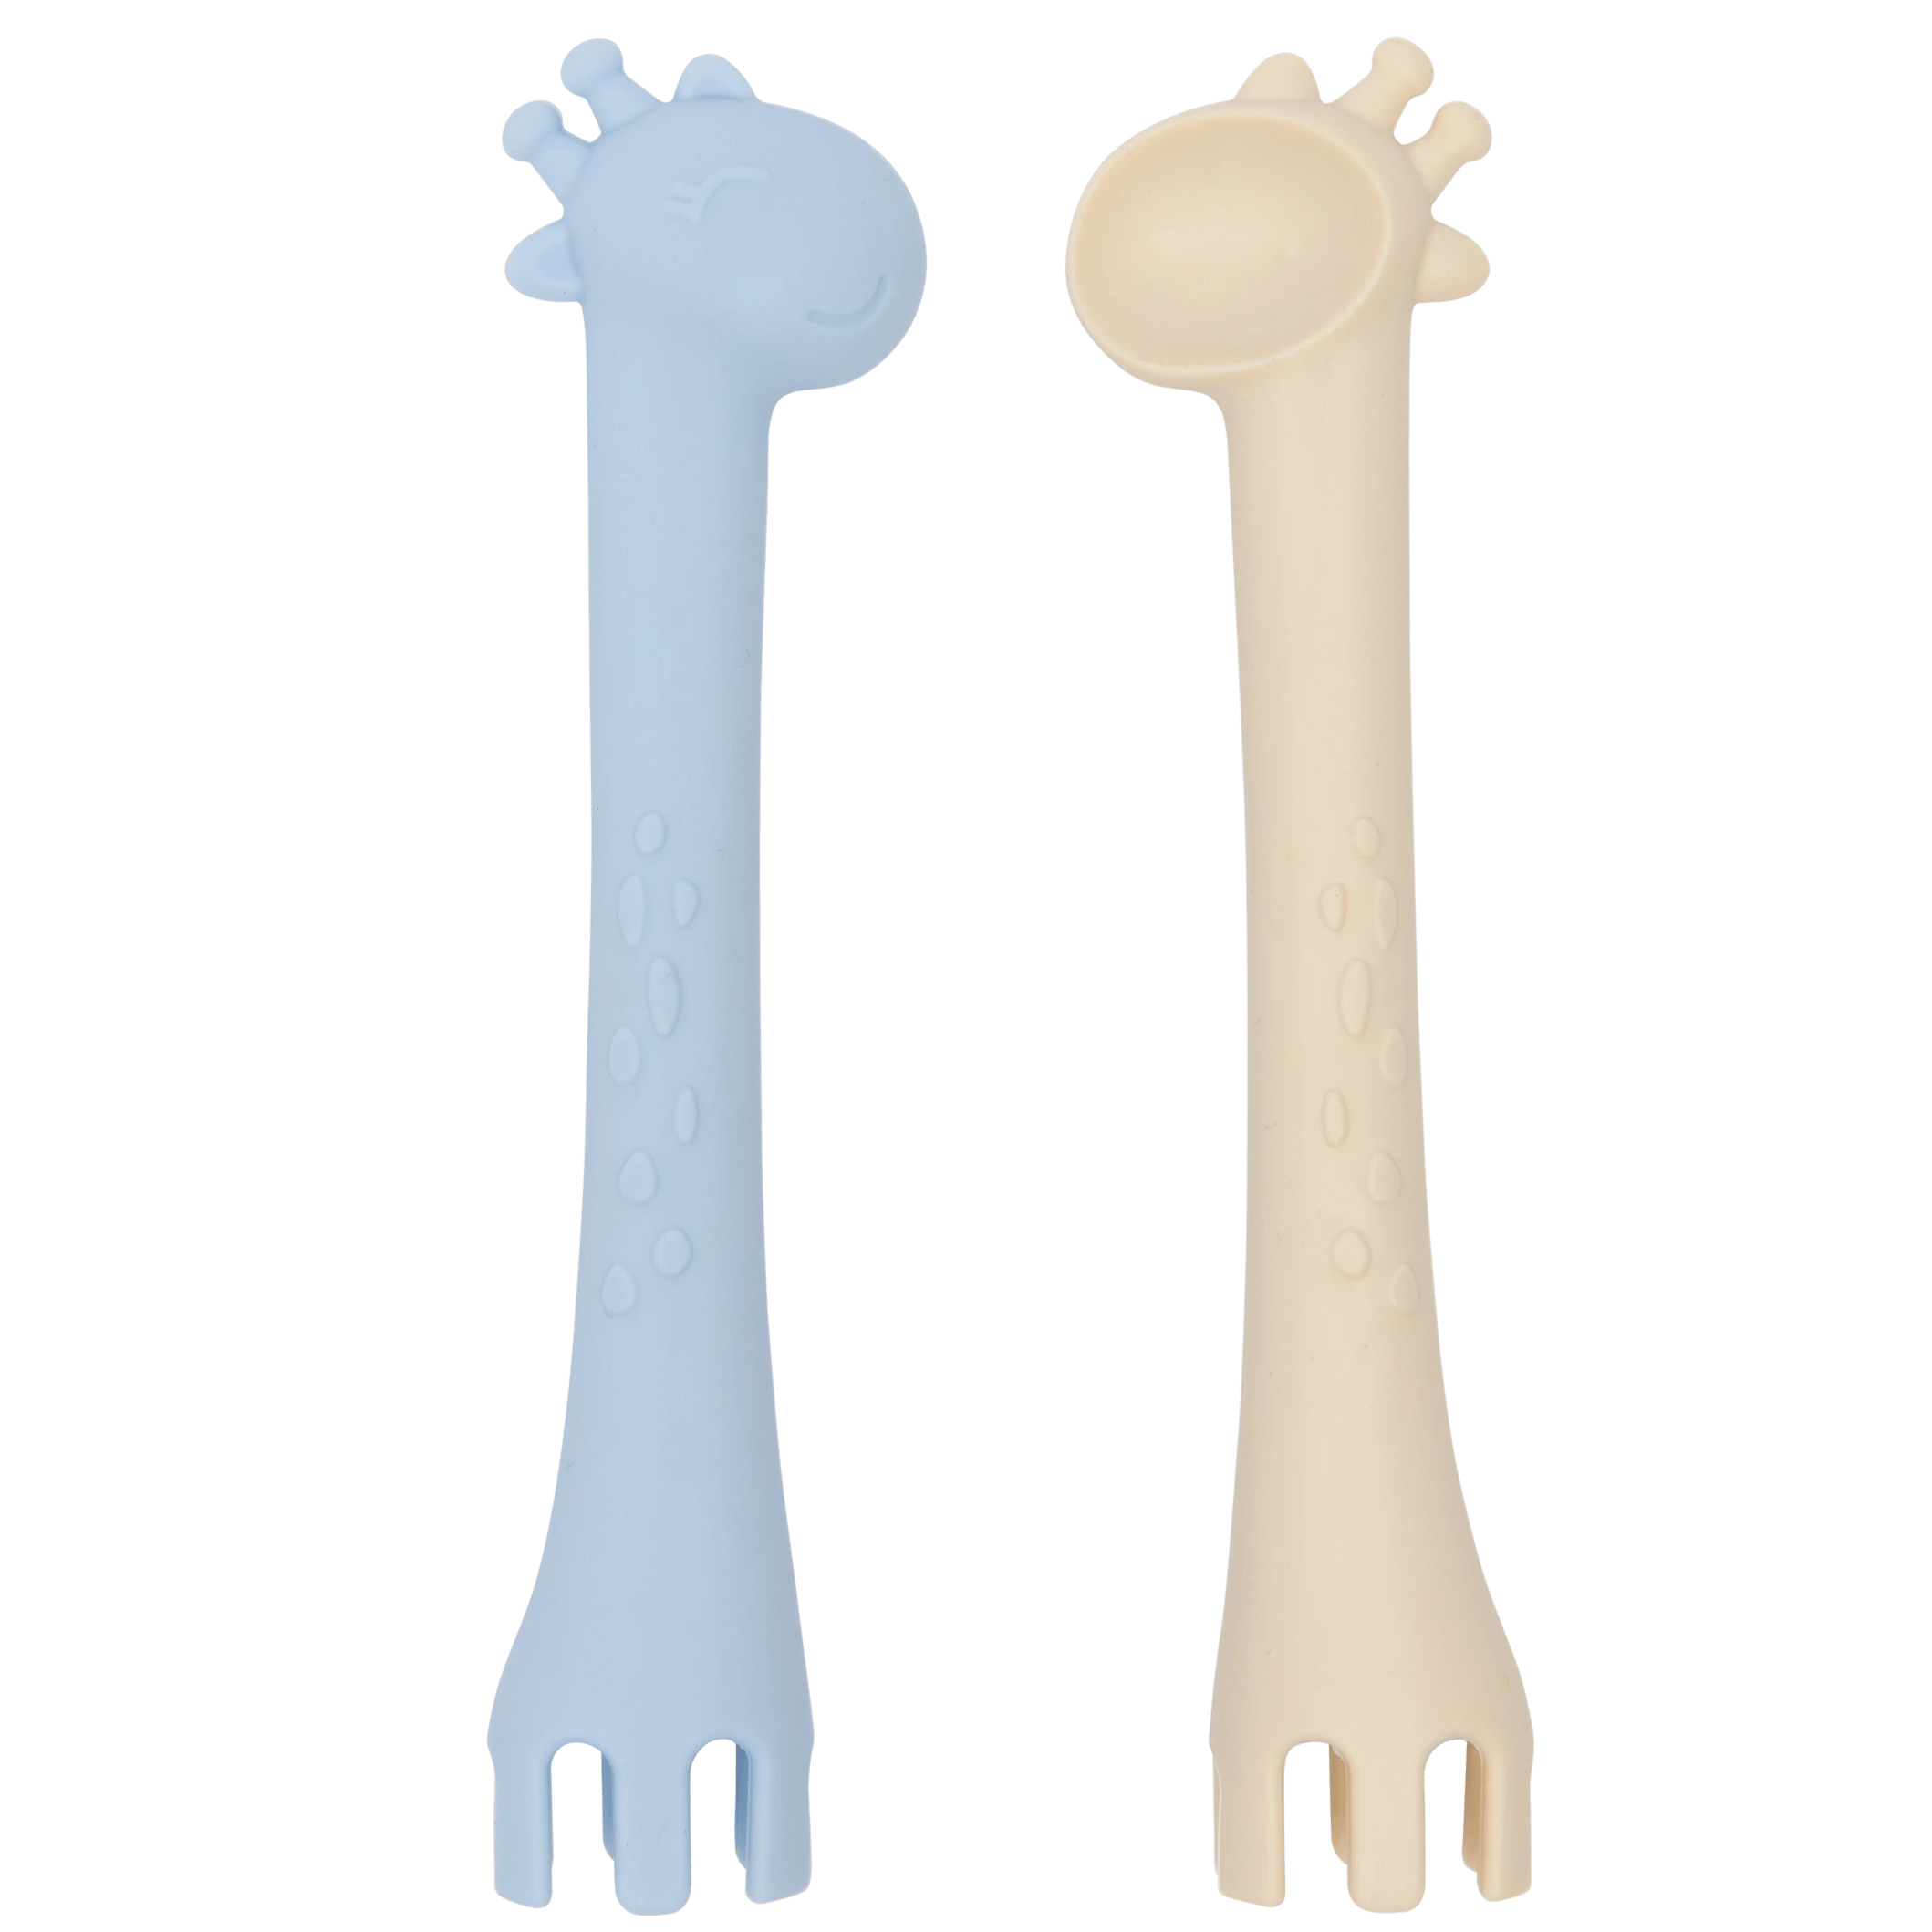 Les enfants cutlery set blue and sand giraffe spoon and fork duo